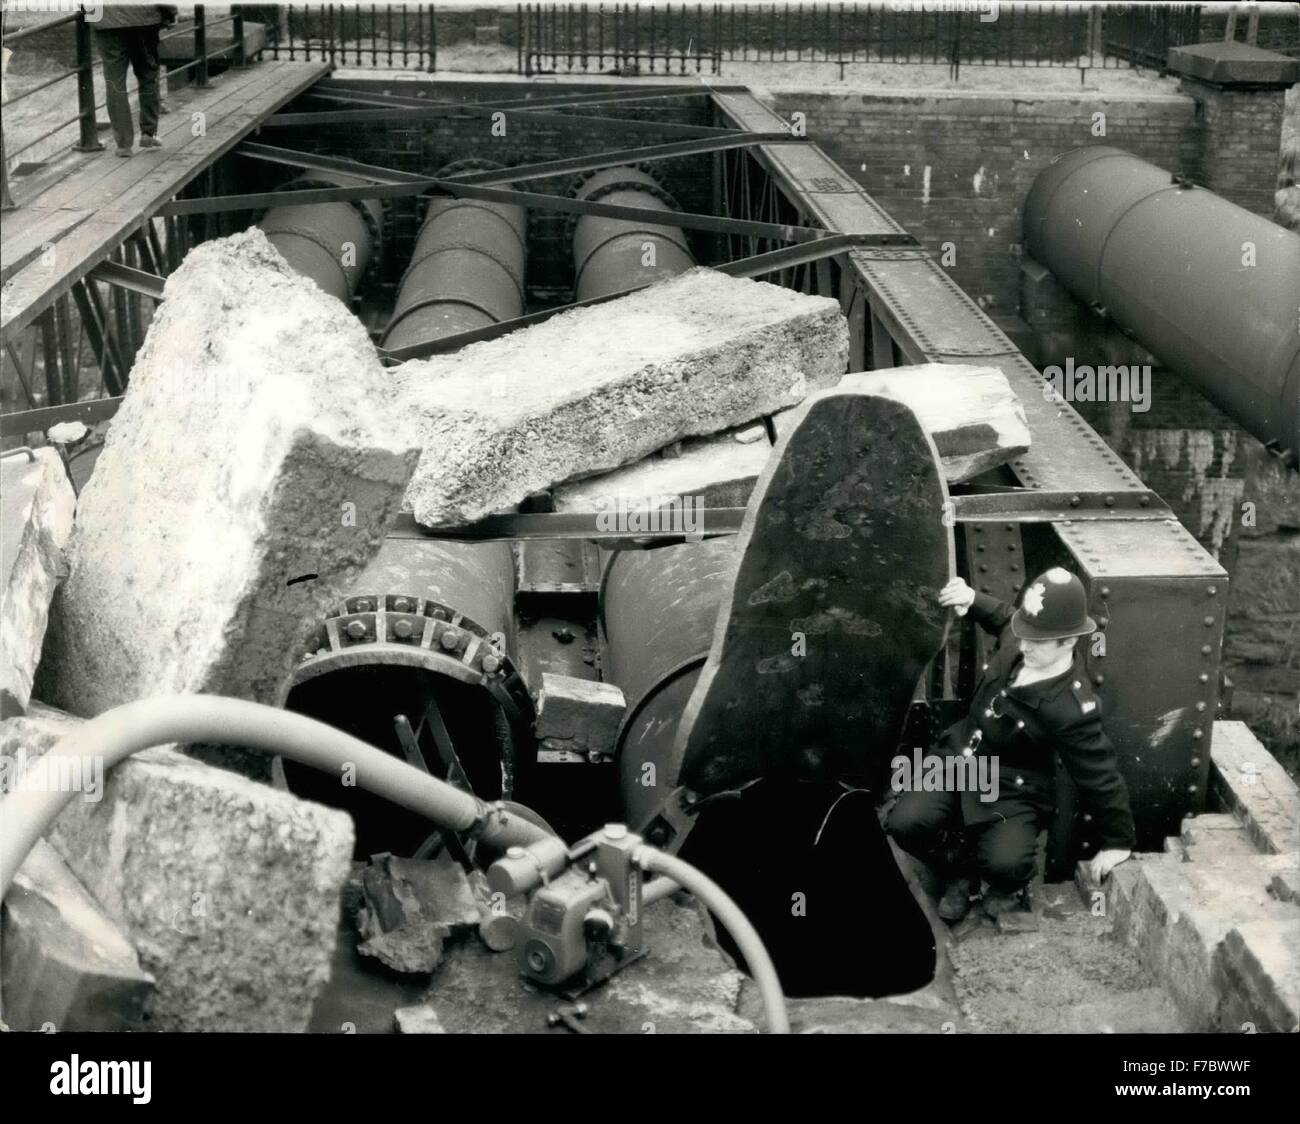 1962 - City's Pipelines Blown Up: Police began a hunt for a gang of saboteurs after two giant pipelines carrying half Birmingham's water supply from the Elan Valley, in Wales, were shattered at Hagley, Worcestershire today, in a time-bomb explosion which caused extensive flooding and cut a railway link. Photo Shows: A policeman looks into the gaping hole which was blown in the 42-inch diameter main water pipes, at Hagley, today. © Keystone Pictures USA/ZUMAPRESS.com/Alamy Live News Stock Photo